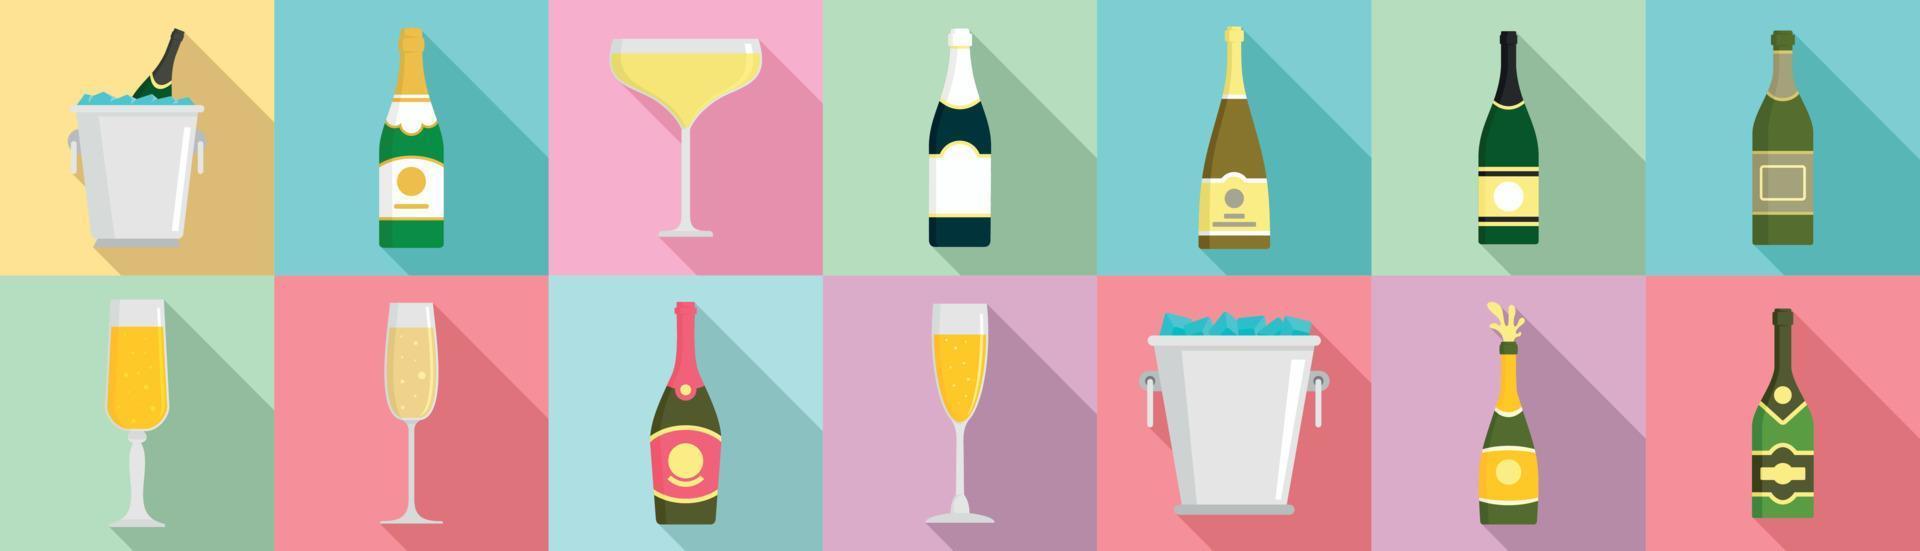 Champagne icon set, flat style vector